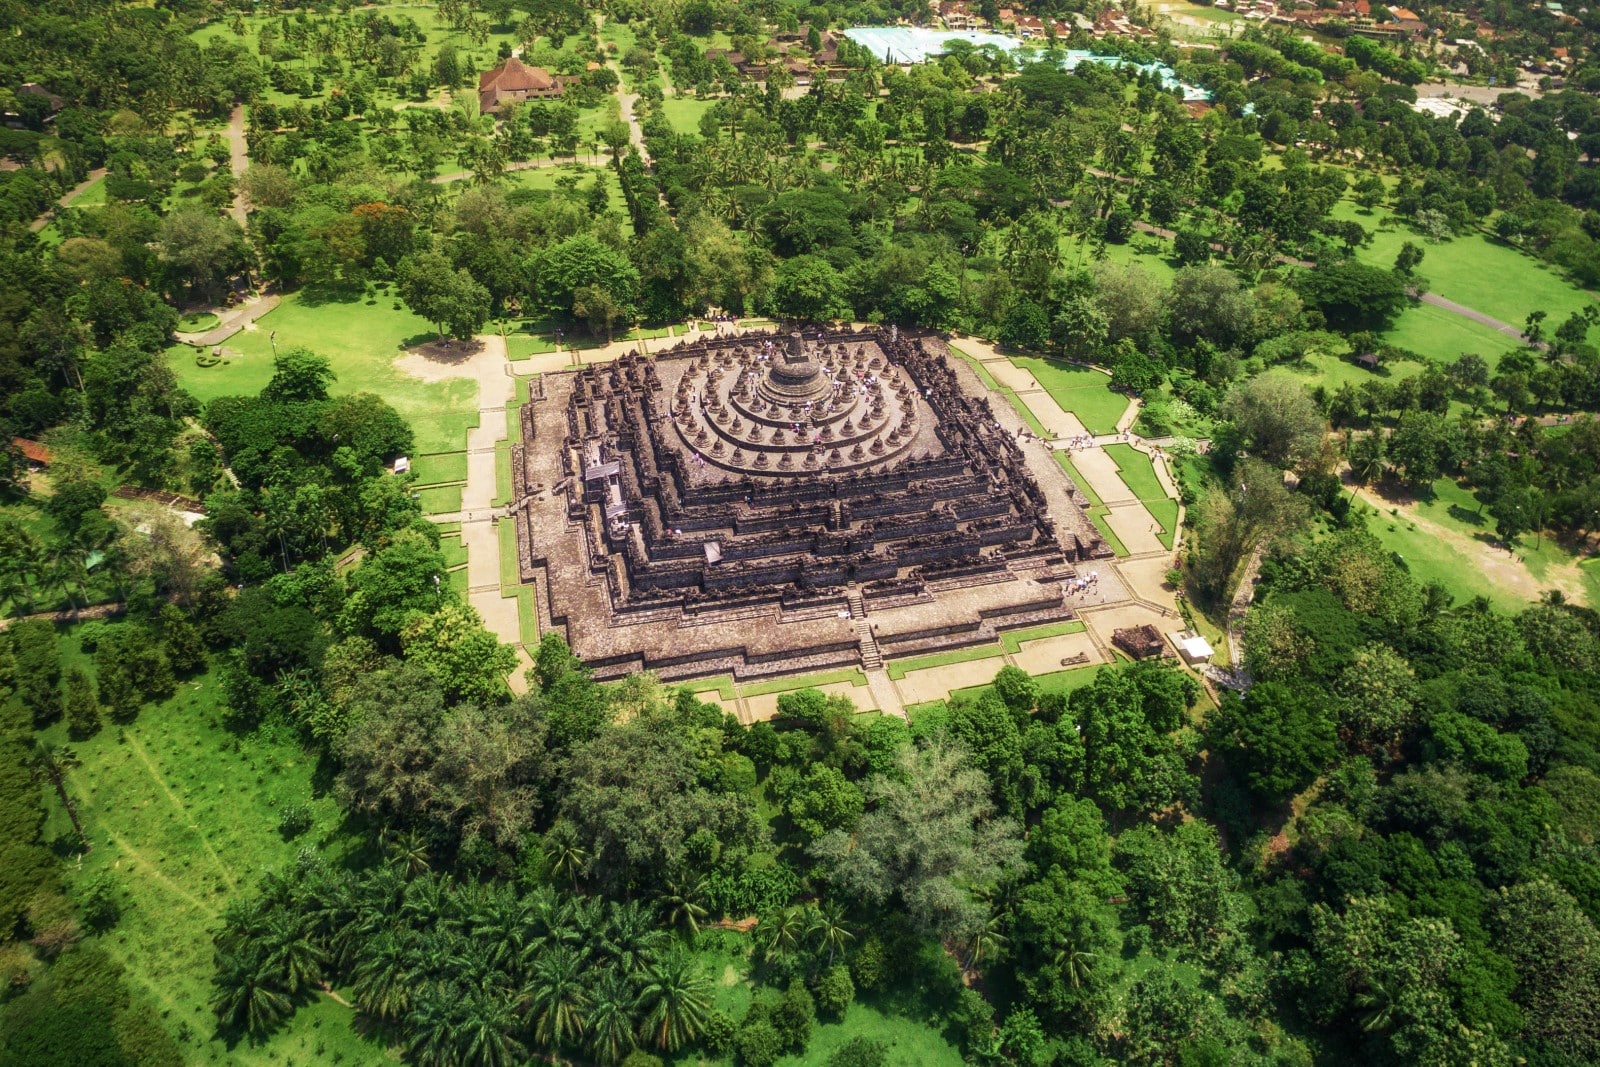 Borobudur Temple, the world’s largest Buddhist monument, in Central Java, Indonesia.